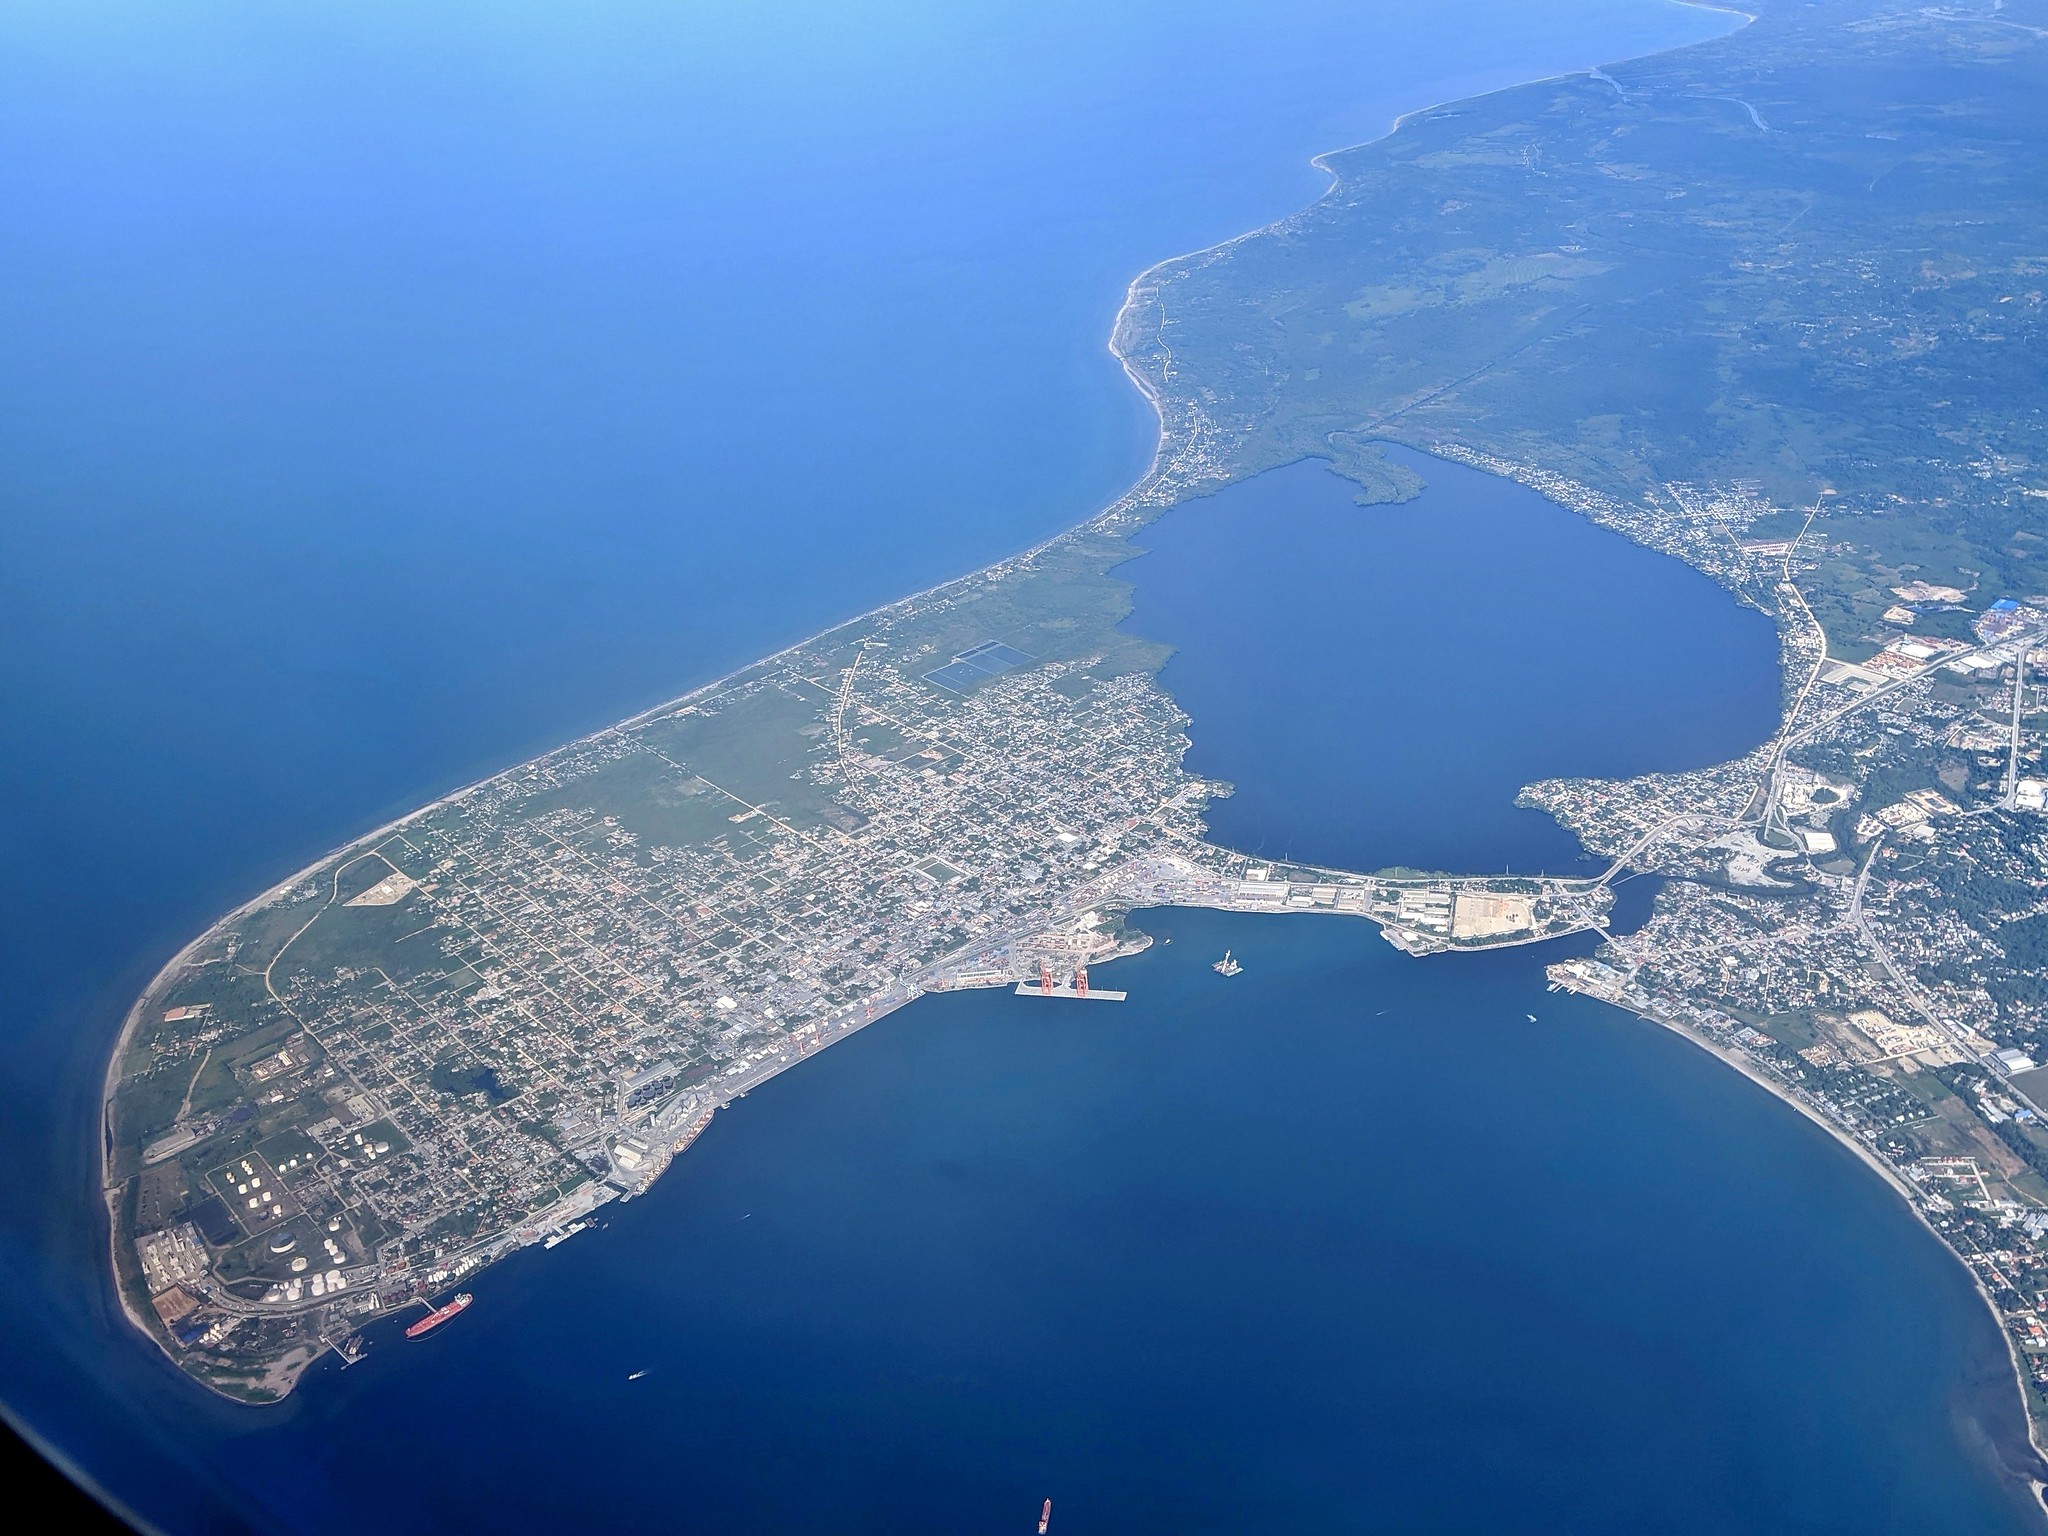 Aerial view of Puerto Cortes, surrounded by the sea and bay